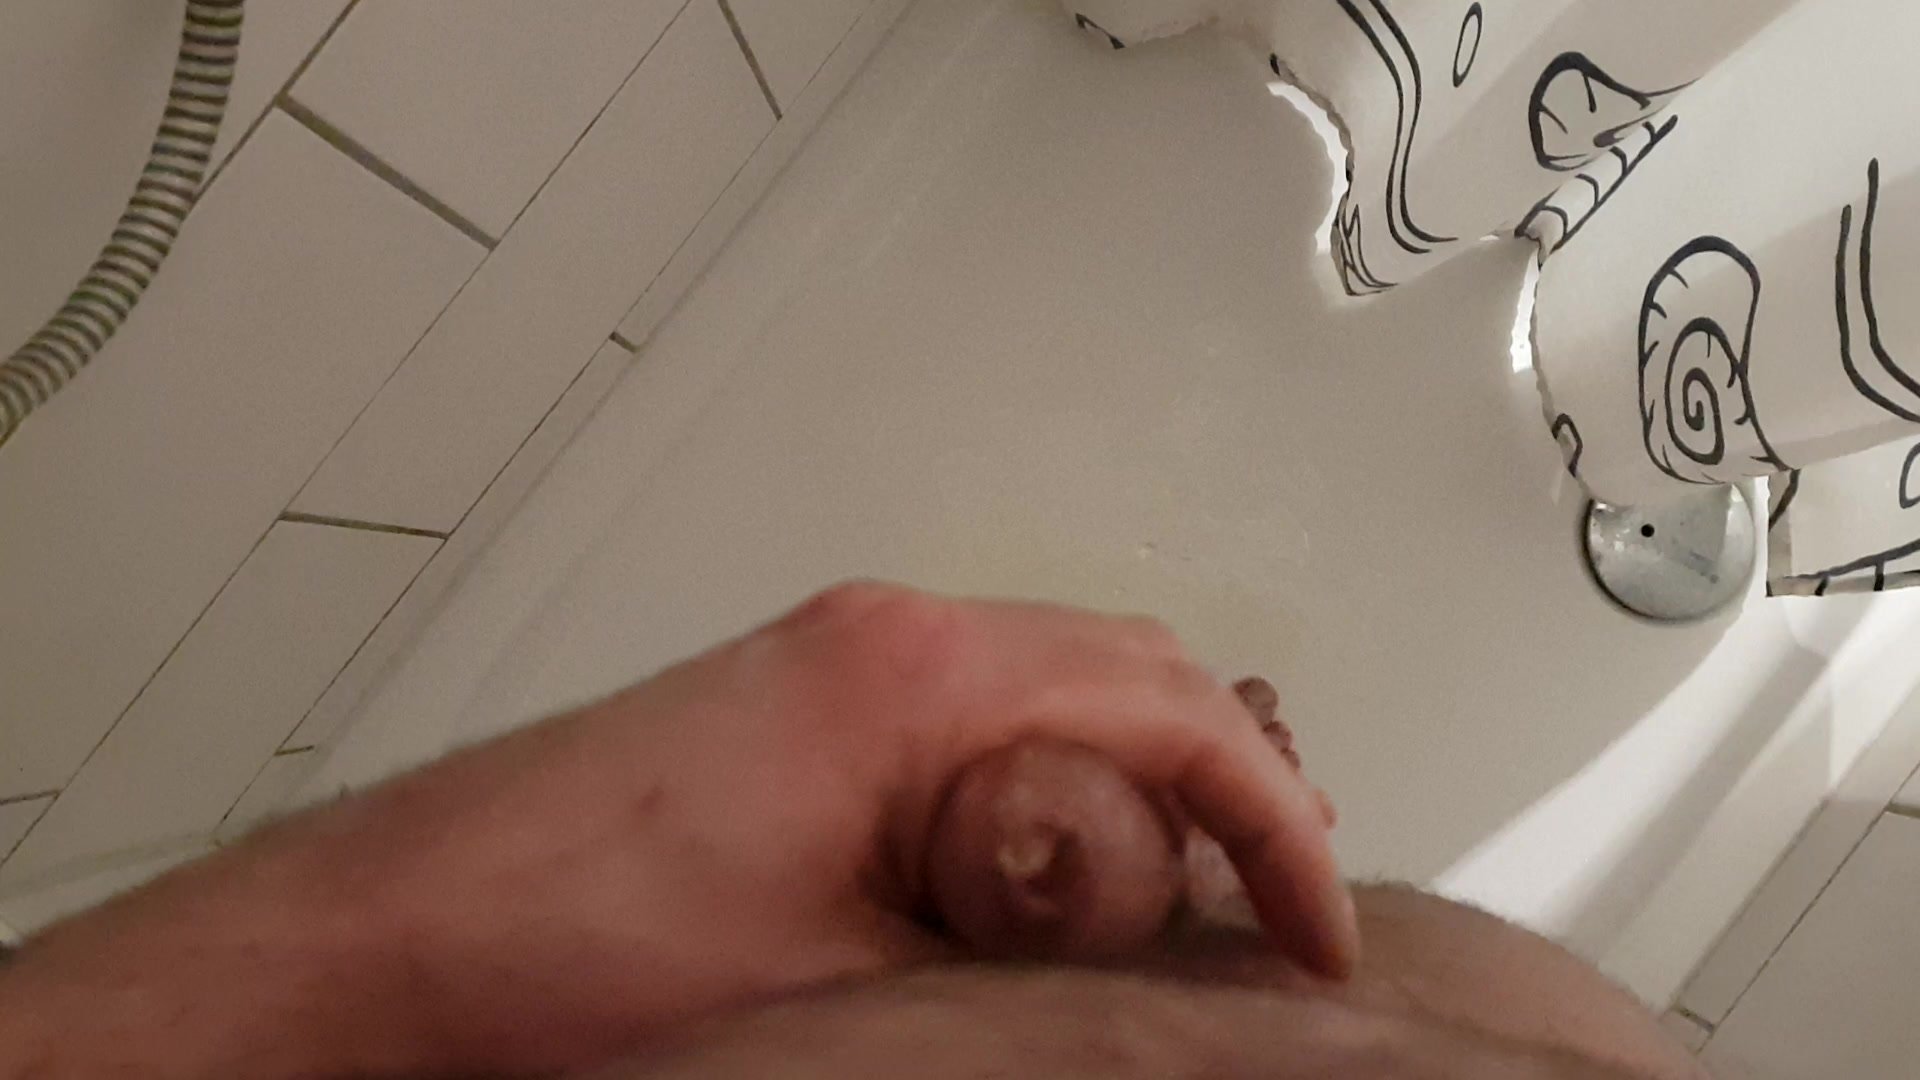 Slave is pissing